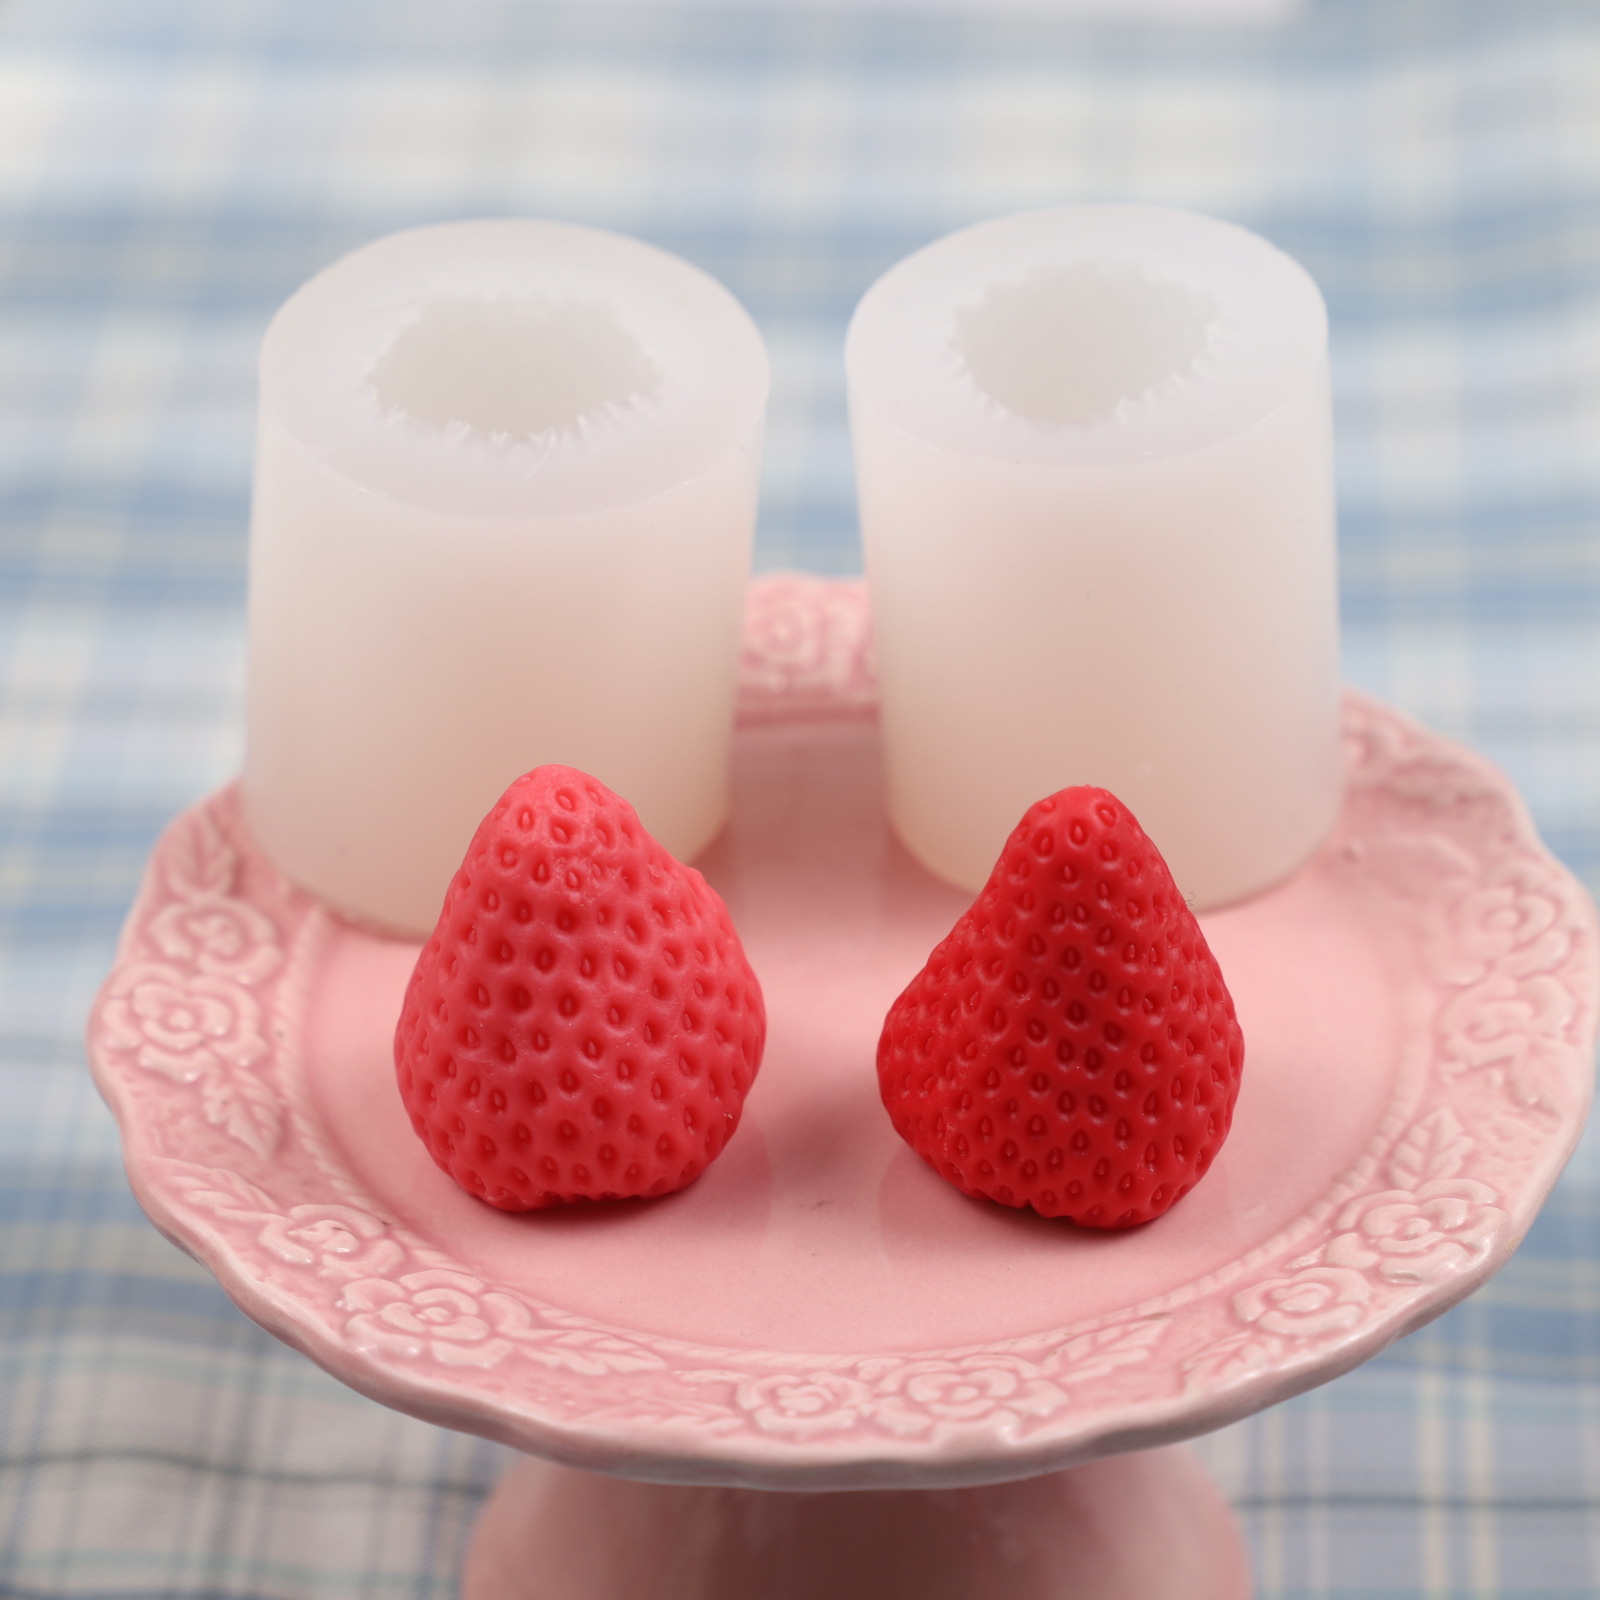 3d Strawberry Silicone Mold - Strawberry Mold For Fondant